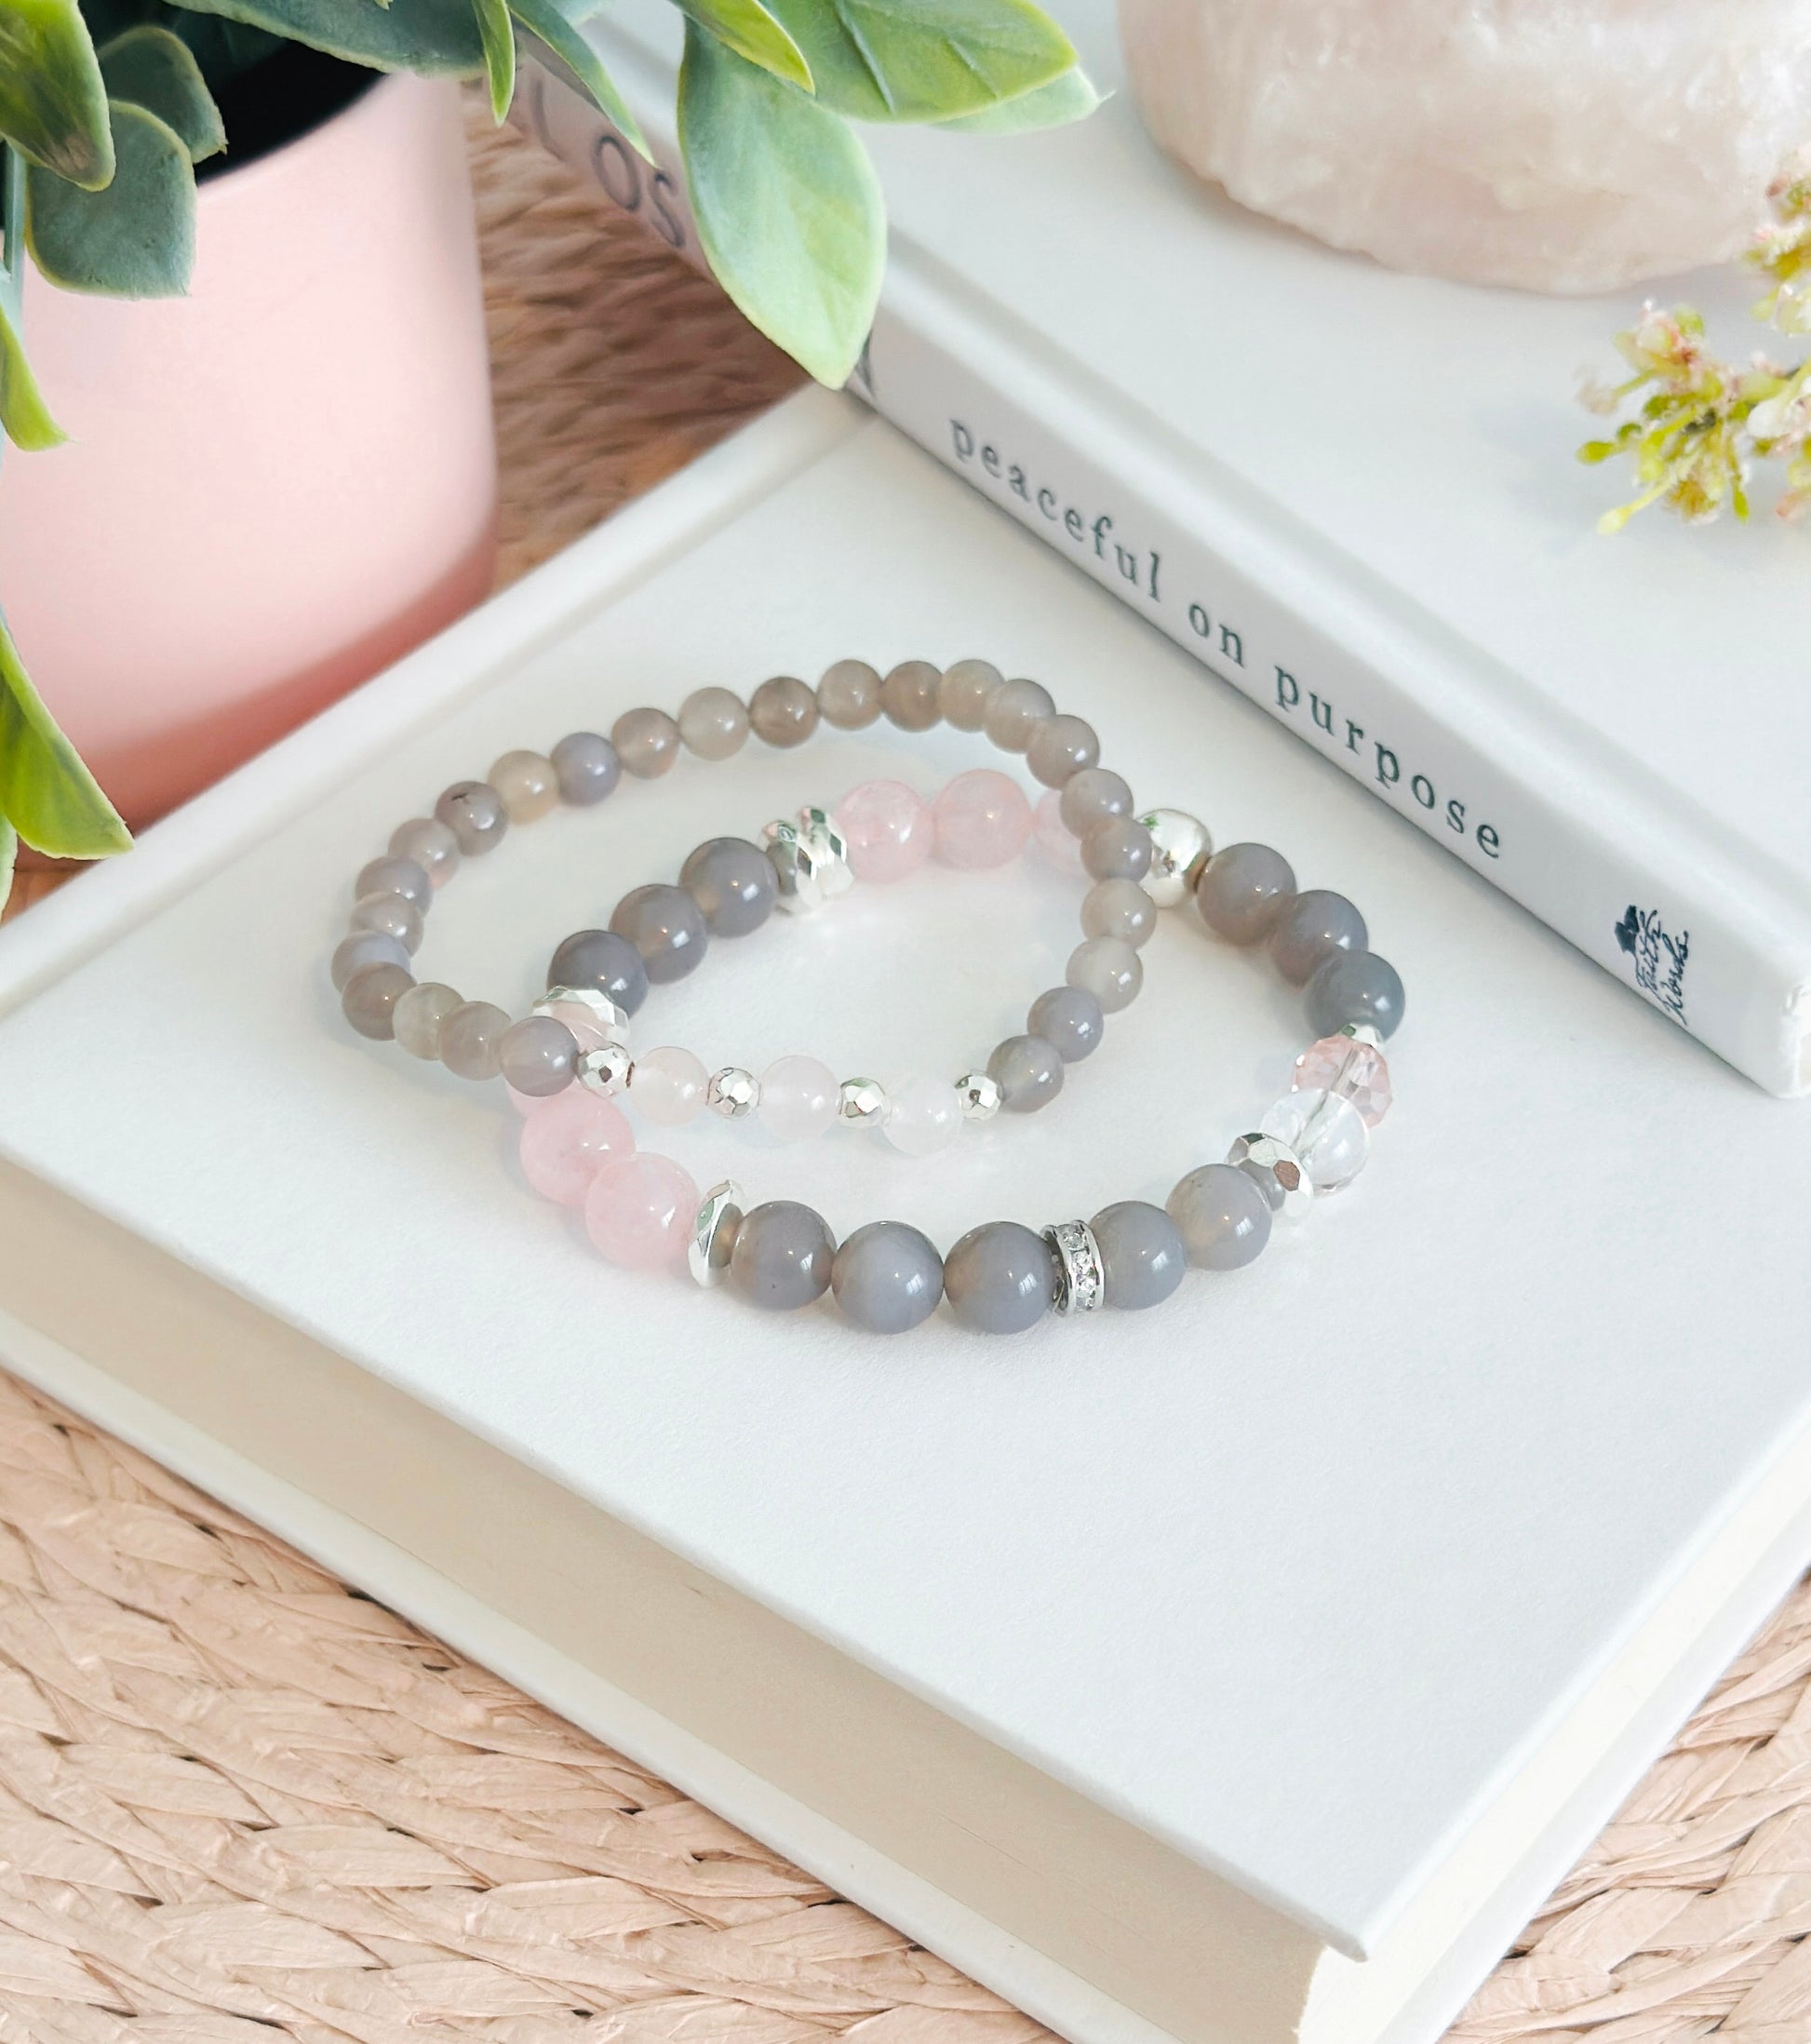 Introducing the "Velvet Rose" gemstone bracelet set, a sublime fusion of gray agate and rose quartz with captivating healing properties. The graceful gray agate, embodying stability and balance, harmonizes seamlessly with the tender energy of rose quartz, the "Stone of Unconditional Love."